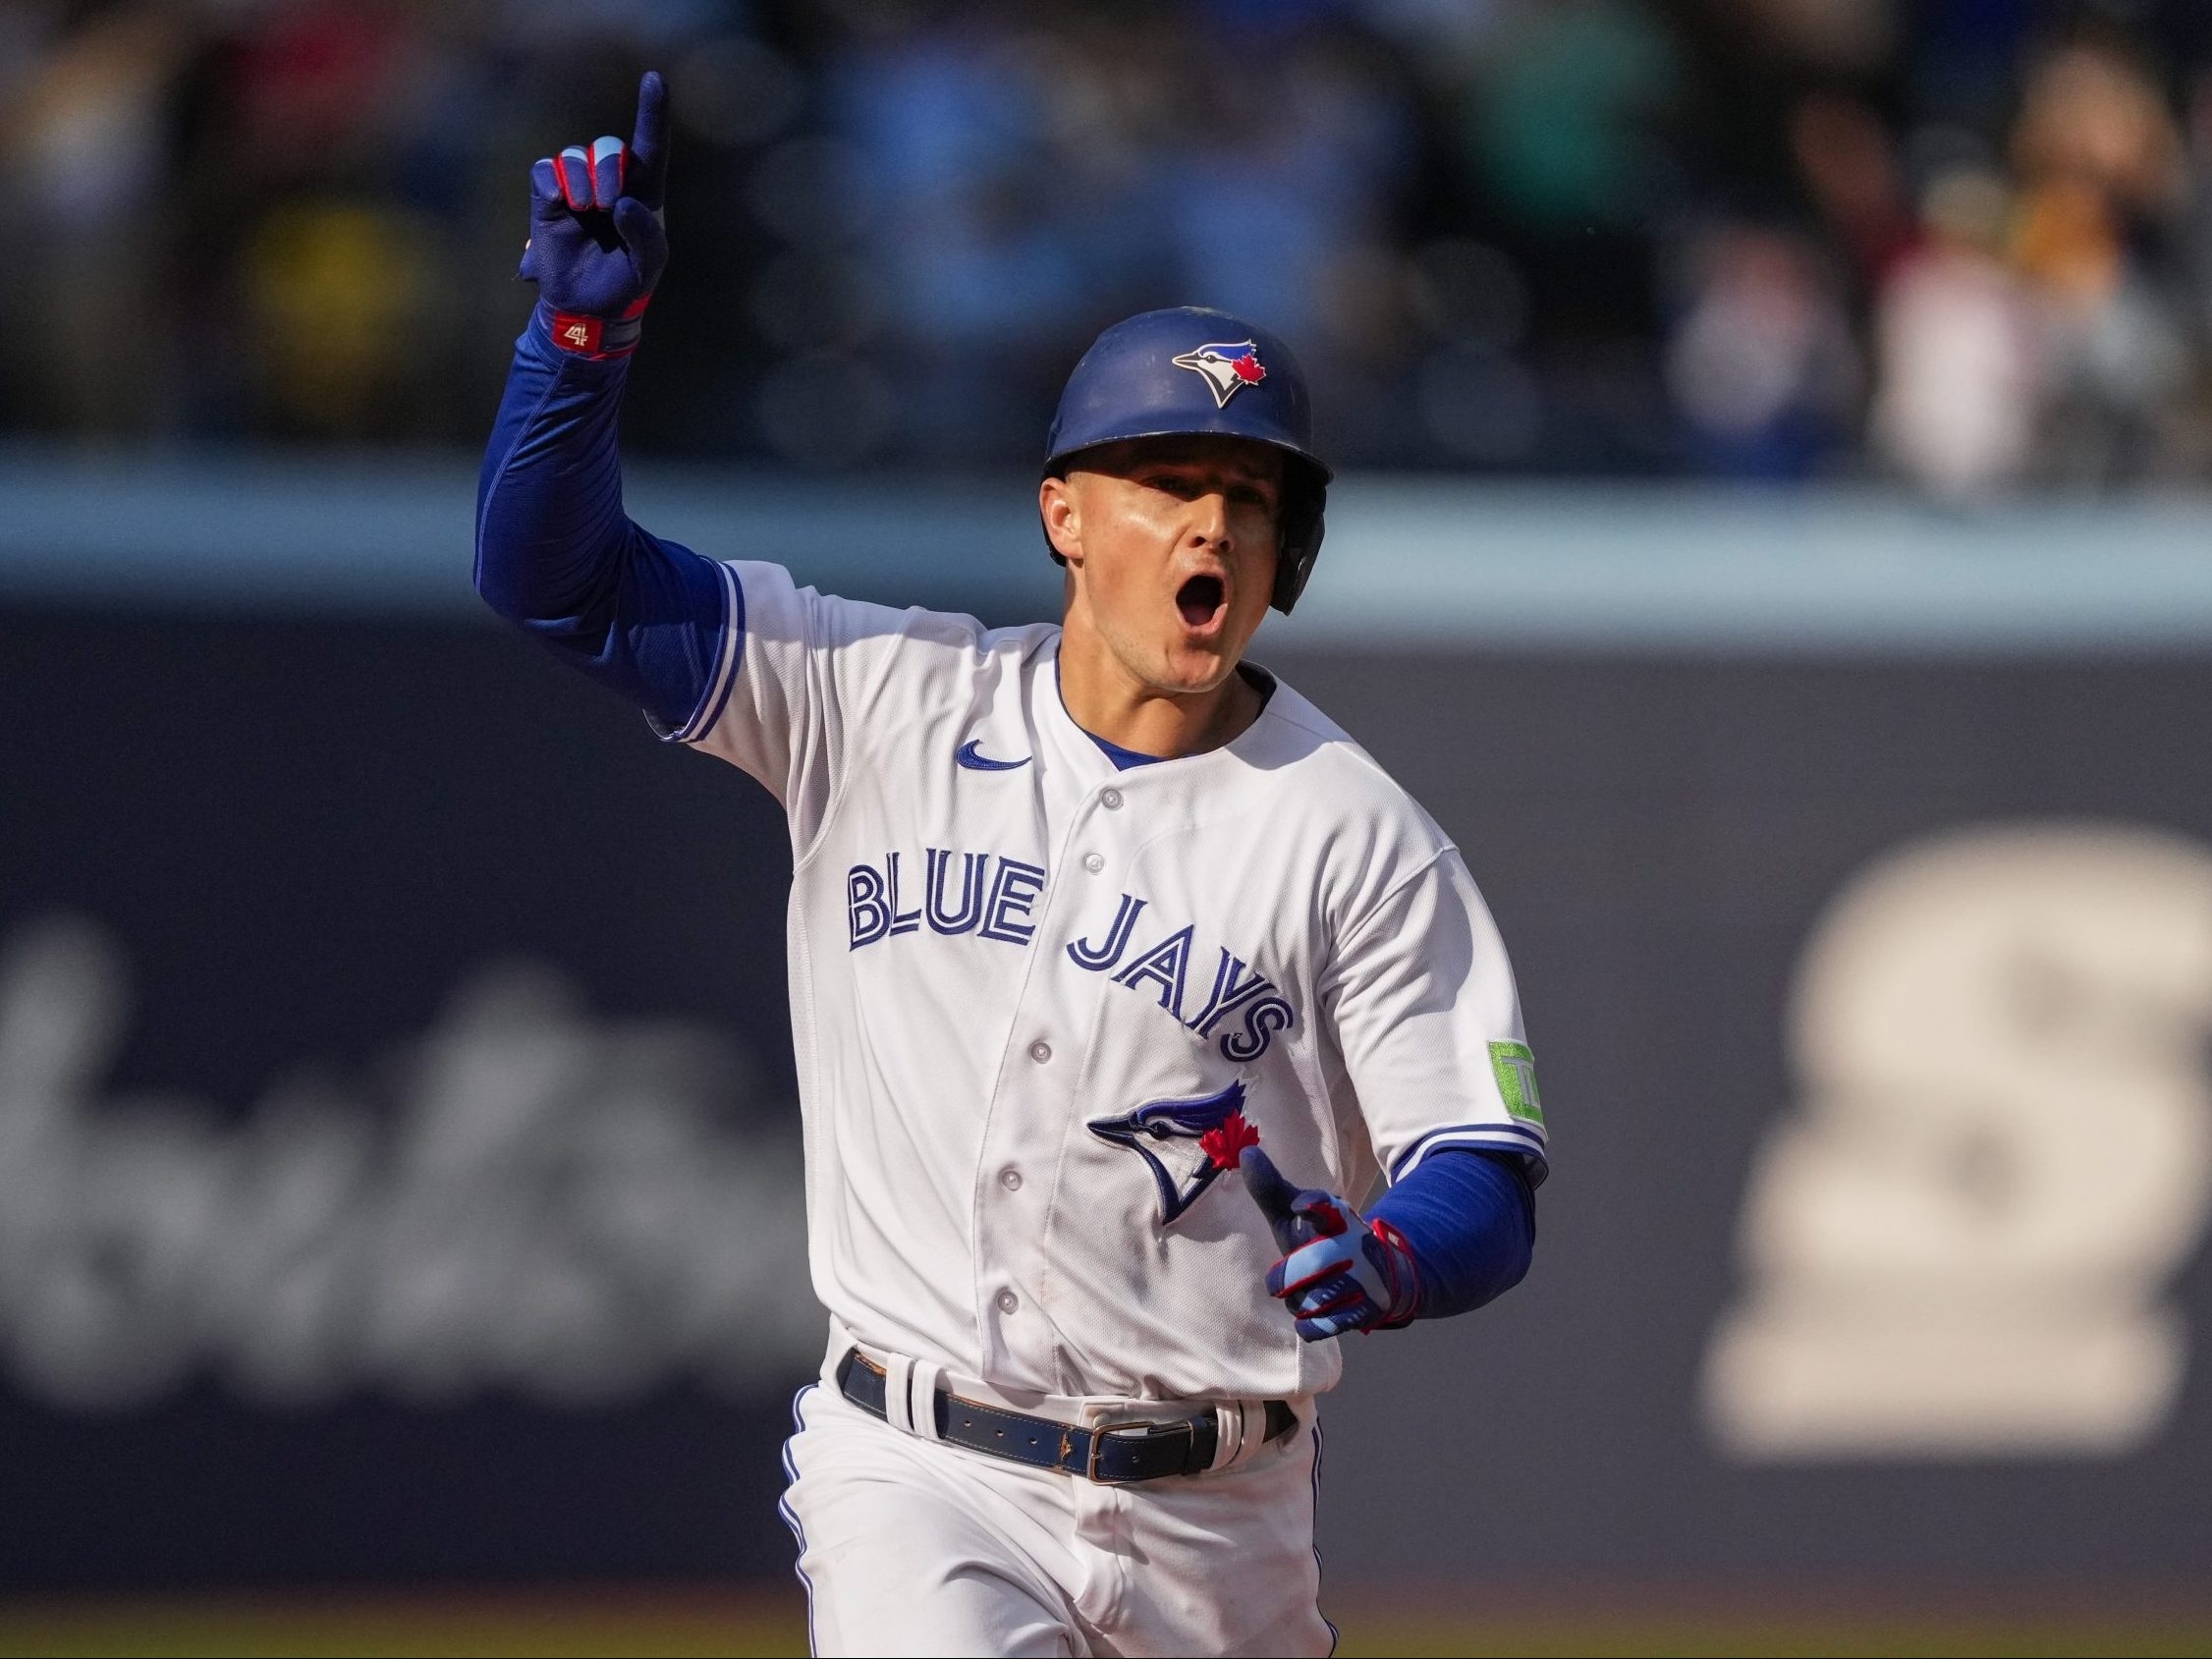 Red Sox win 6th straight, complete 4-game sweep of Blue Jays